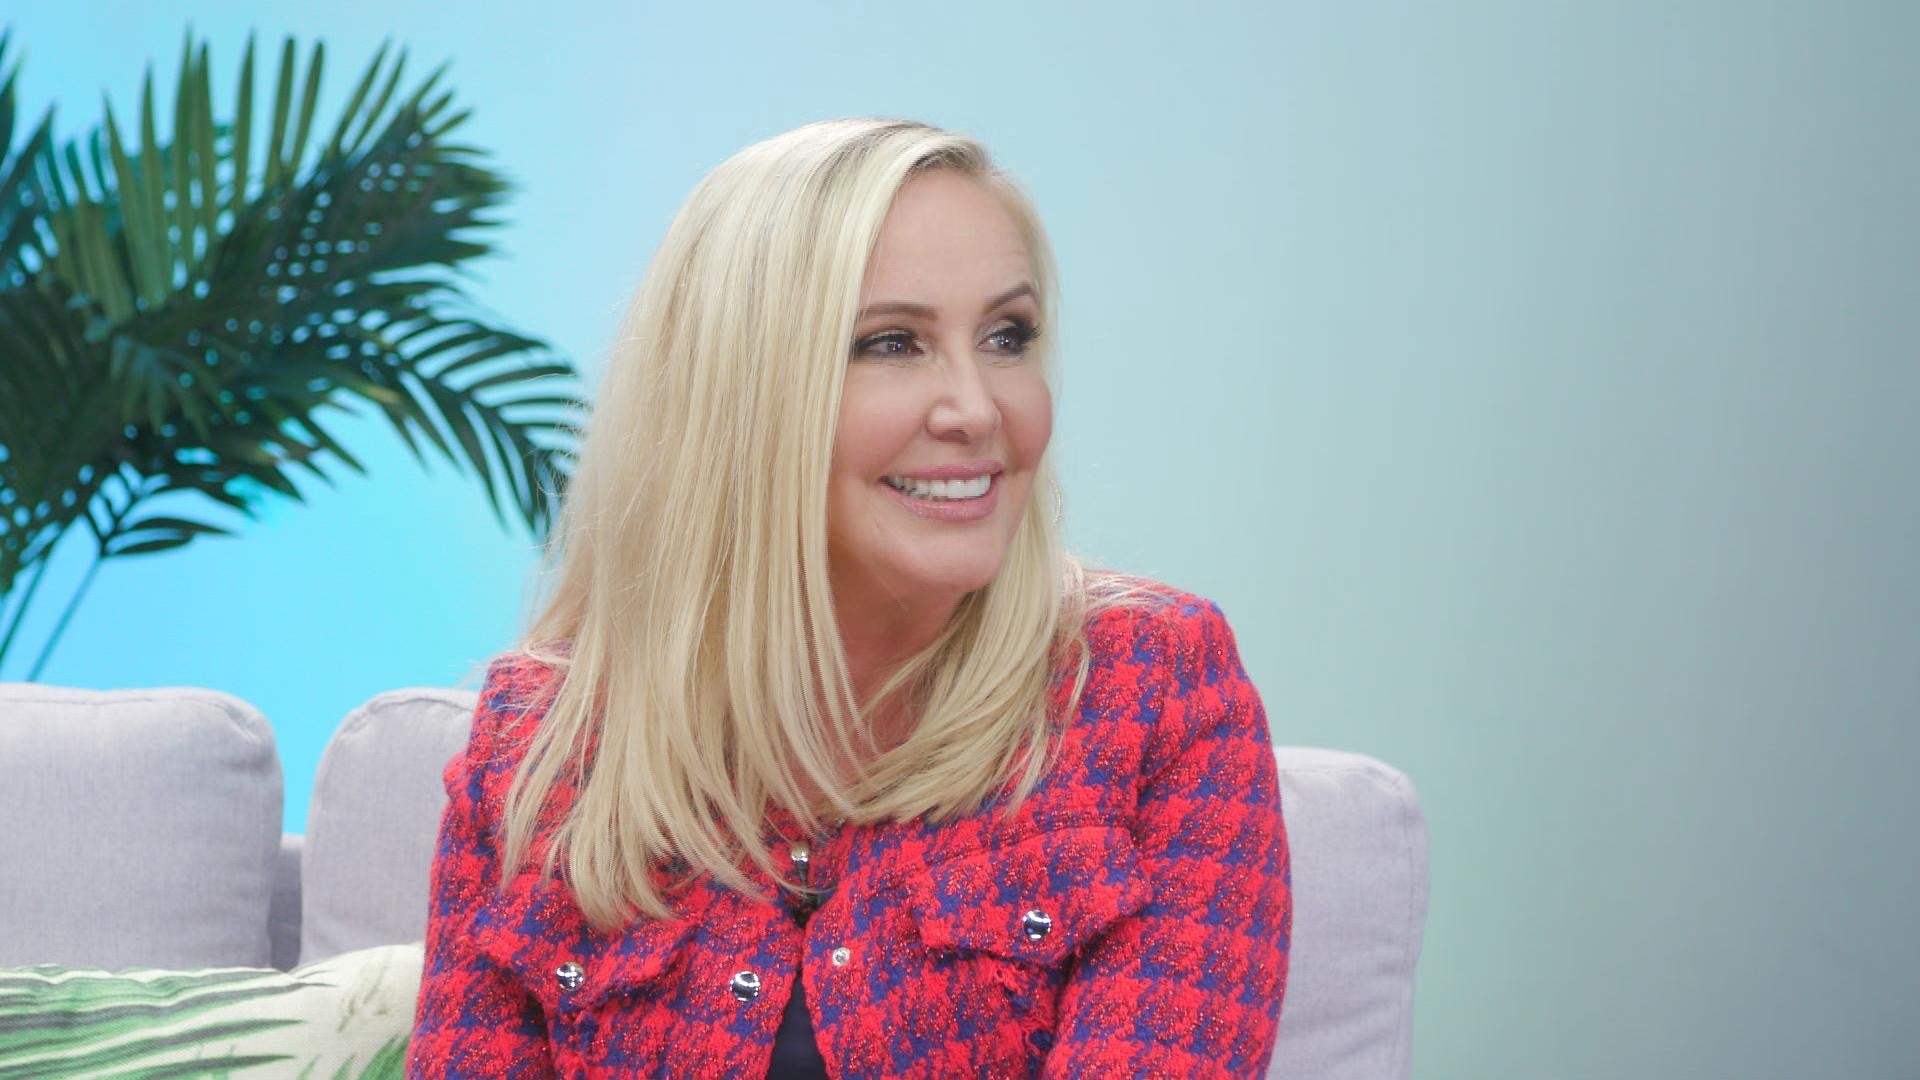 Shannon Beador's New Weight-Loss Goal Includes a Bikini! (Exclusive)